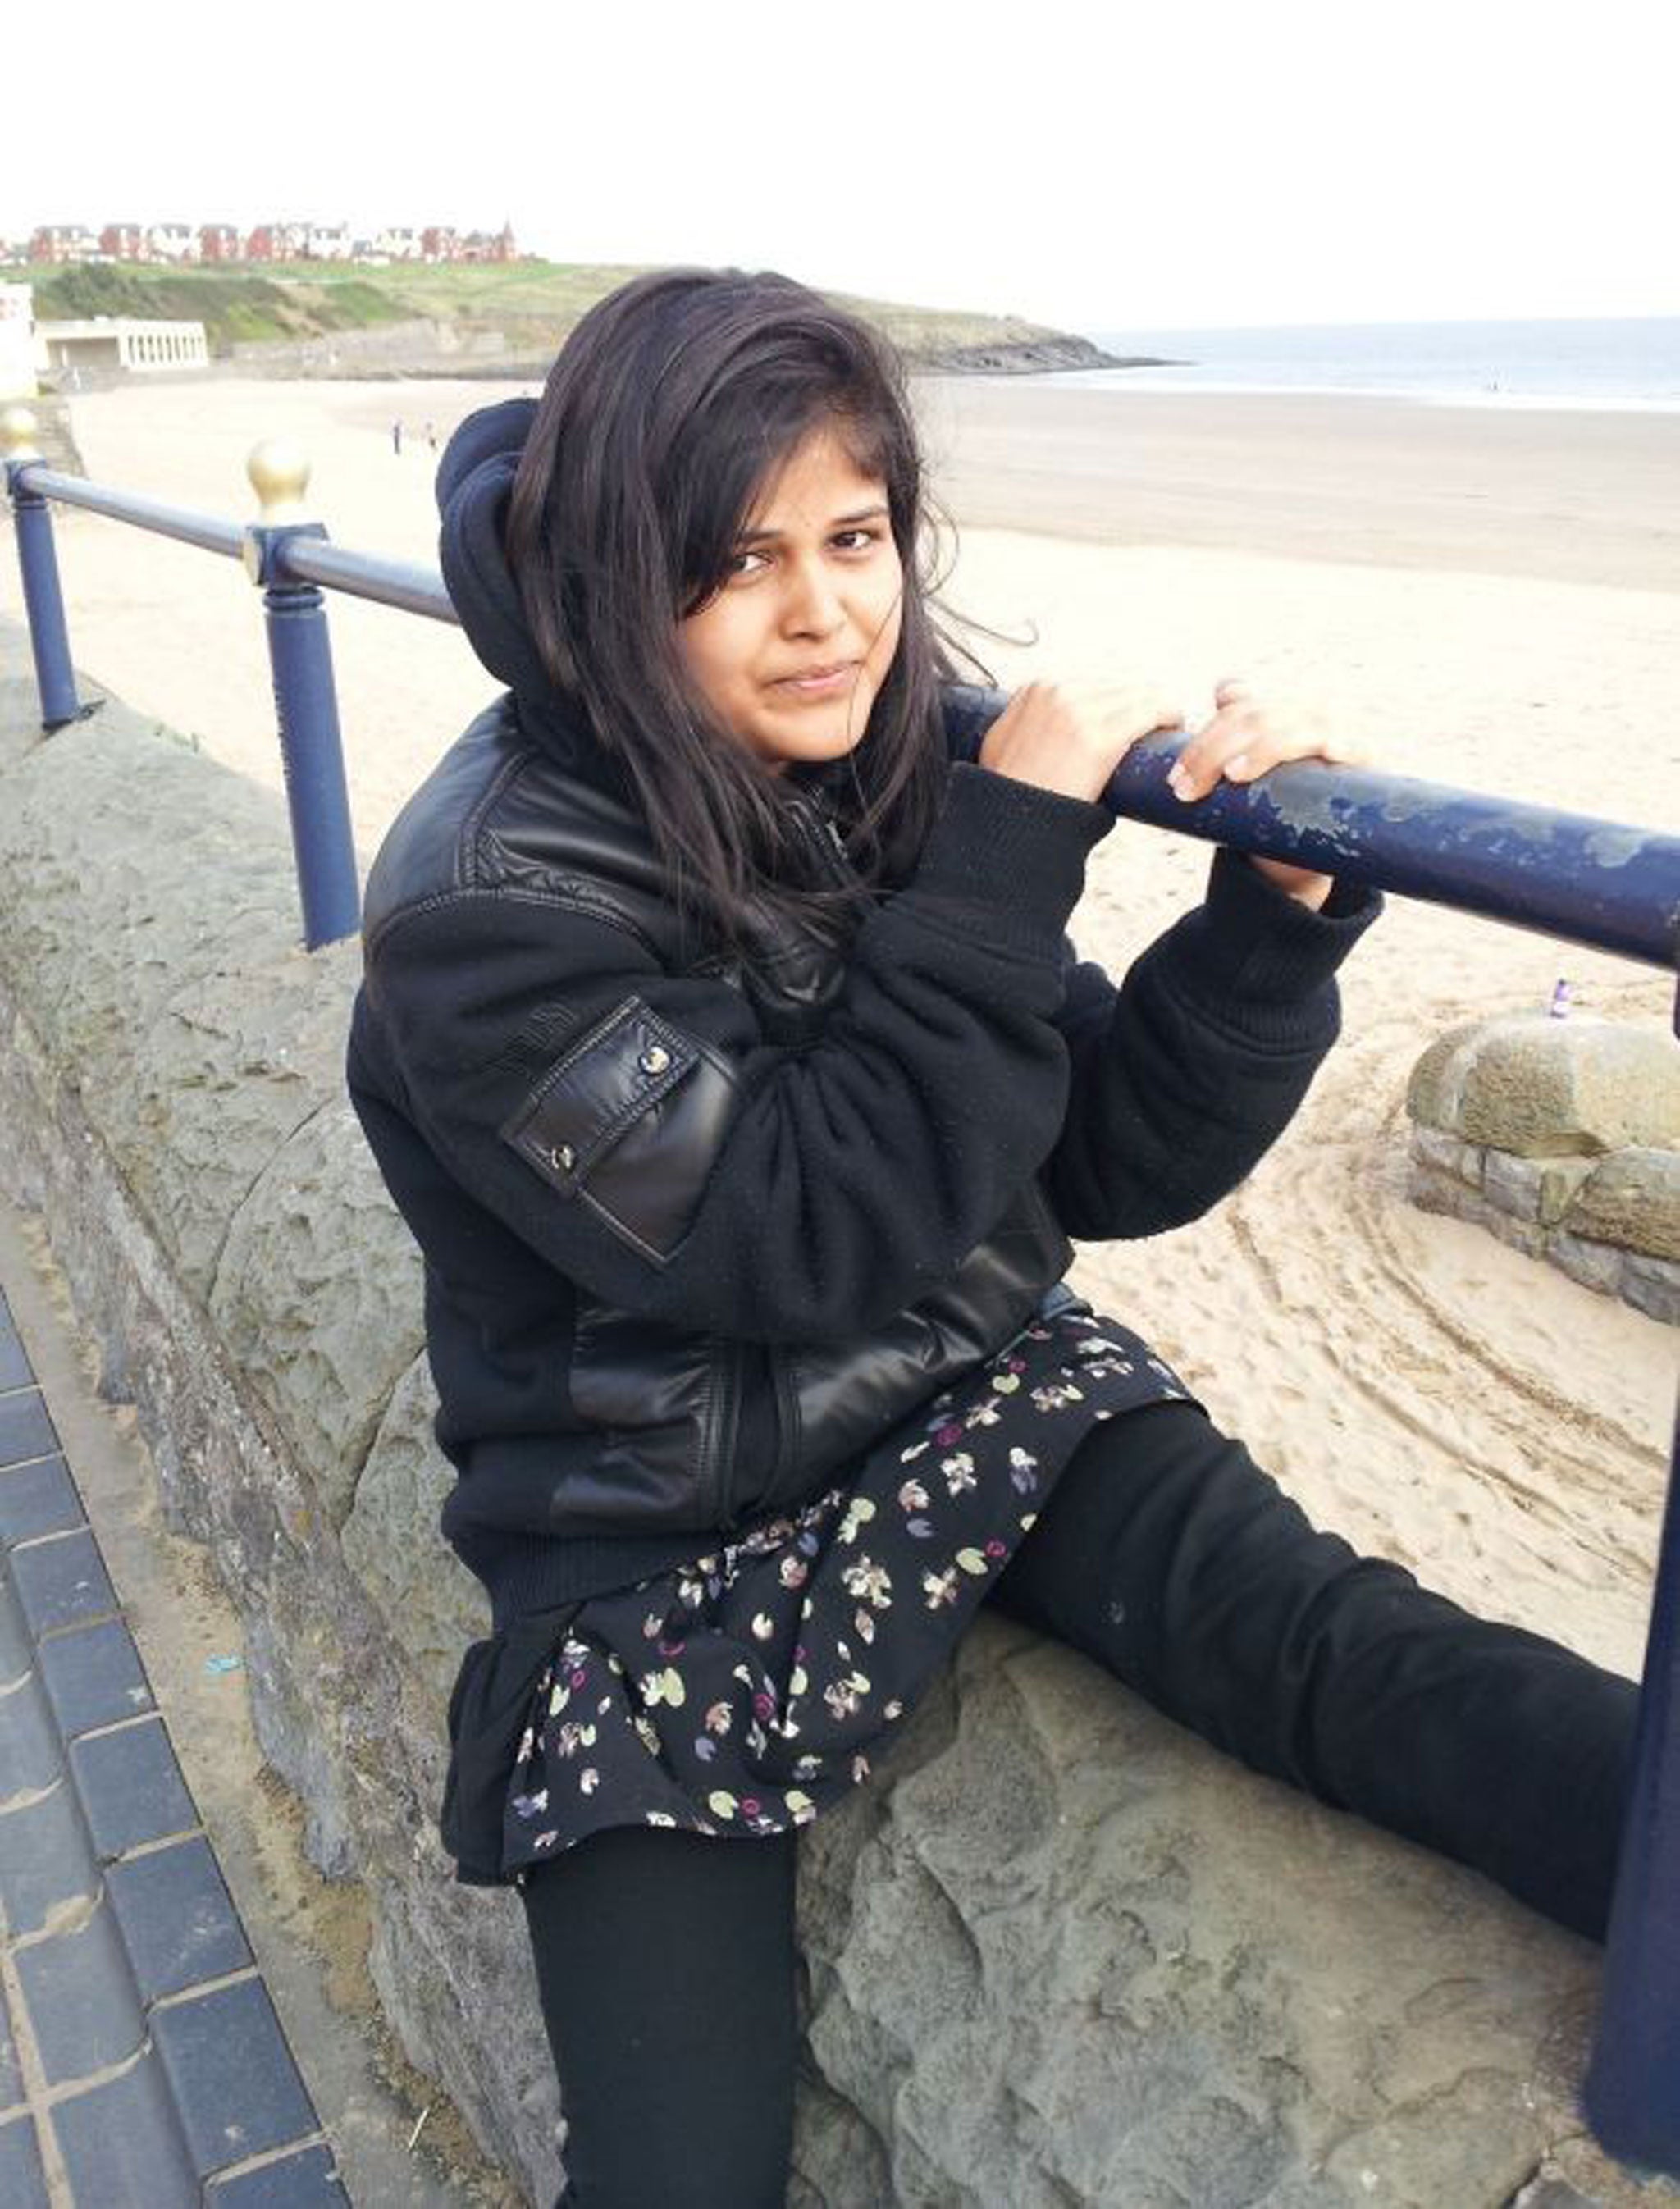 Photo issued by Gwent Police of Nida Ul-Naseer, 18, of Newport, south Wales, who has not been seen since she was reported missing from her home in Linton Street at 8pm on Saturday